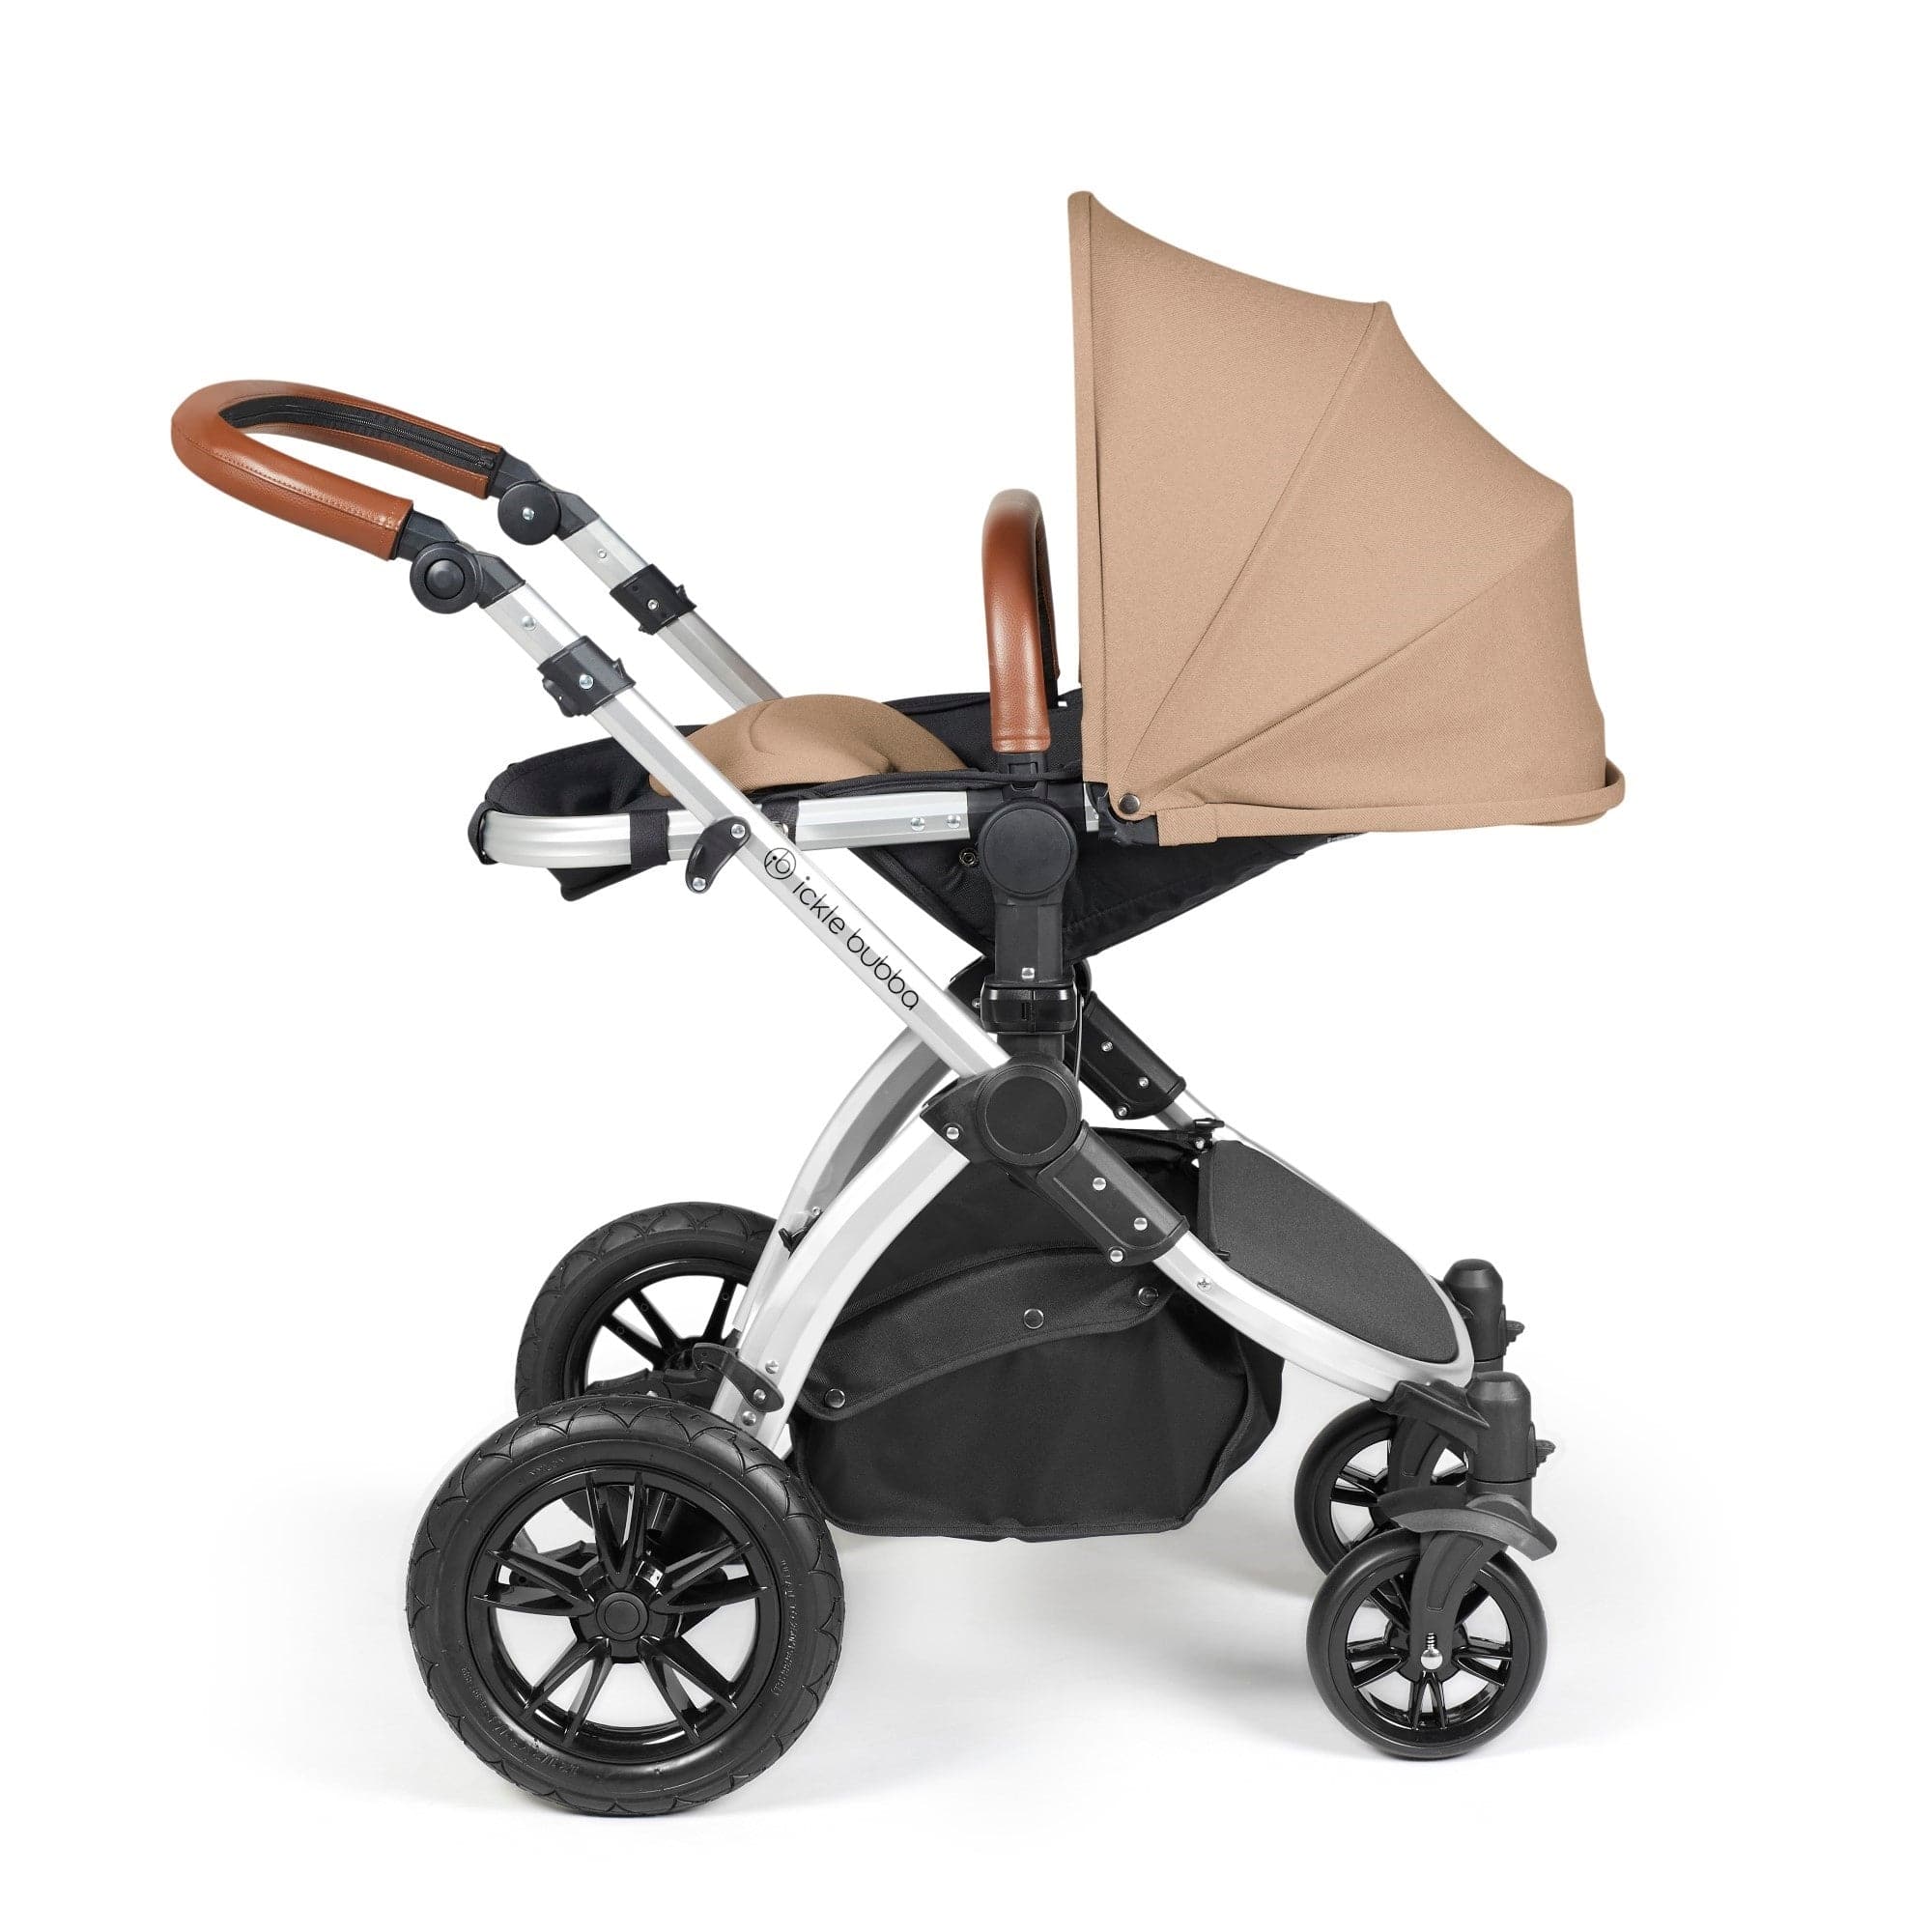 Ickle Bubba Stomp Luxe All-In-One I-Size Travel System With Isofix Base - Silver / Desert / Tan   